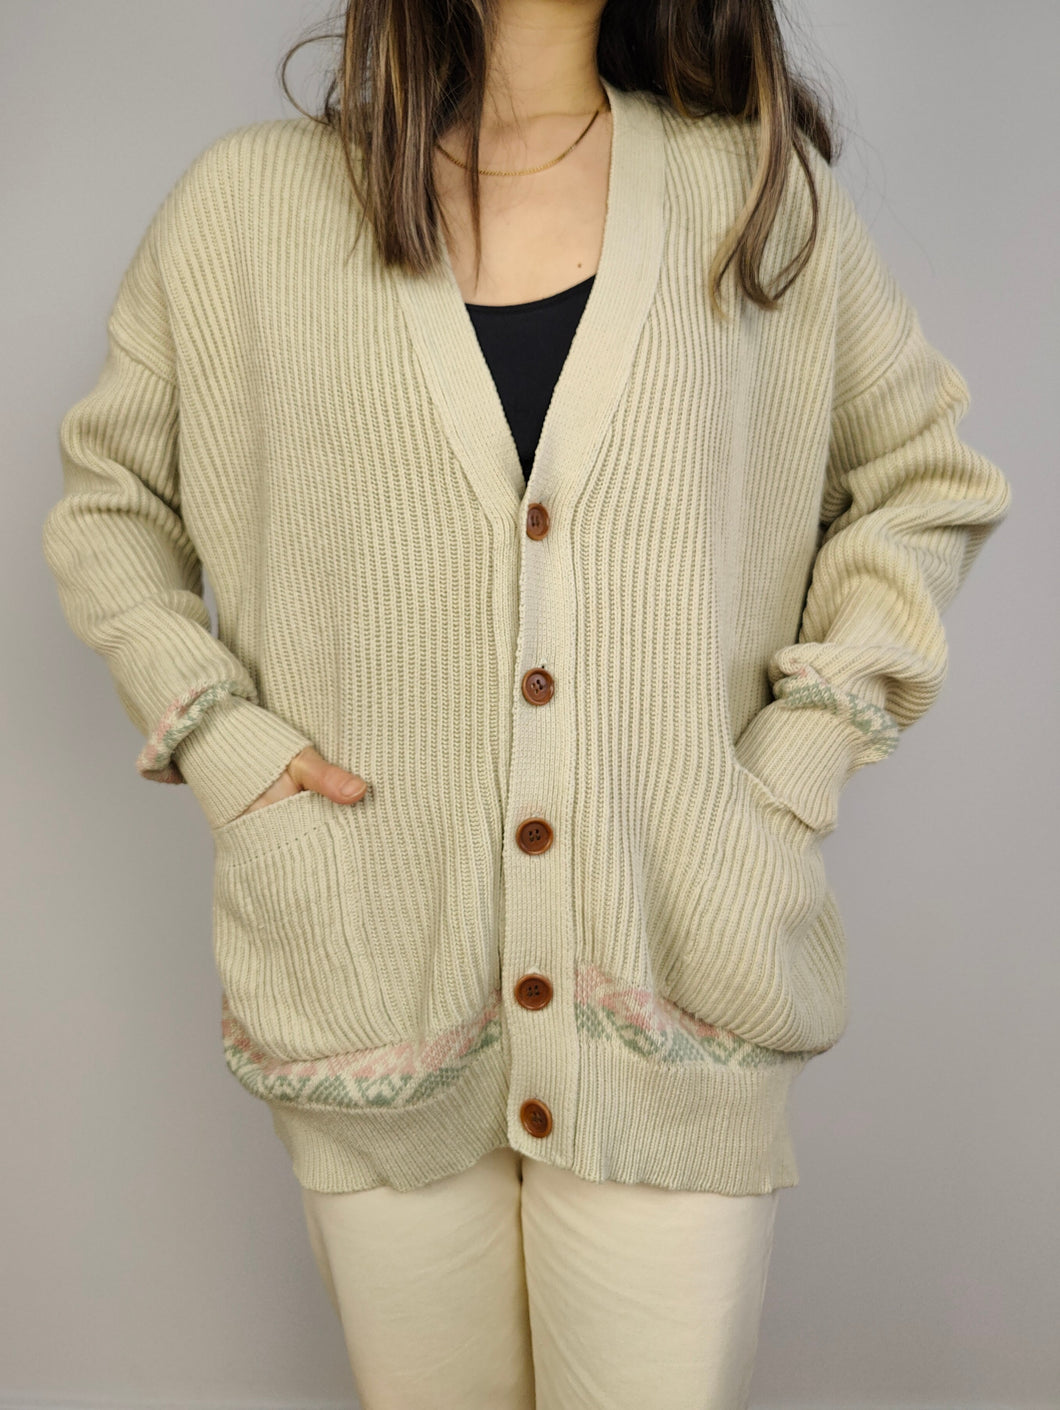 The Cream Cotton Ribbed Cardigan | Vintage knit knitted sweater jacket off white beige ivory pattern GB Pedrini L-XL